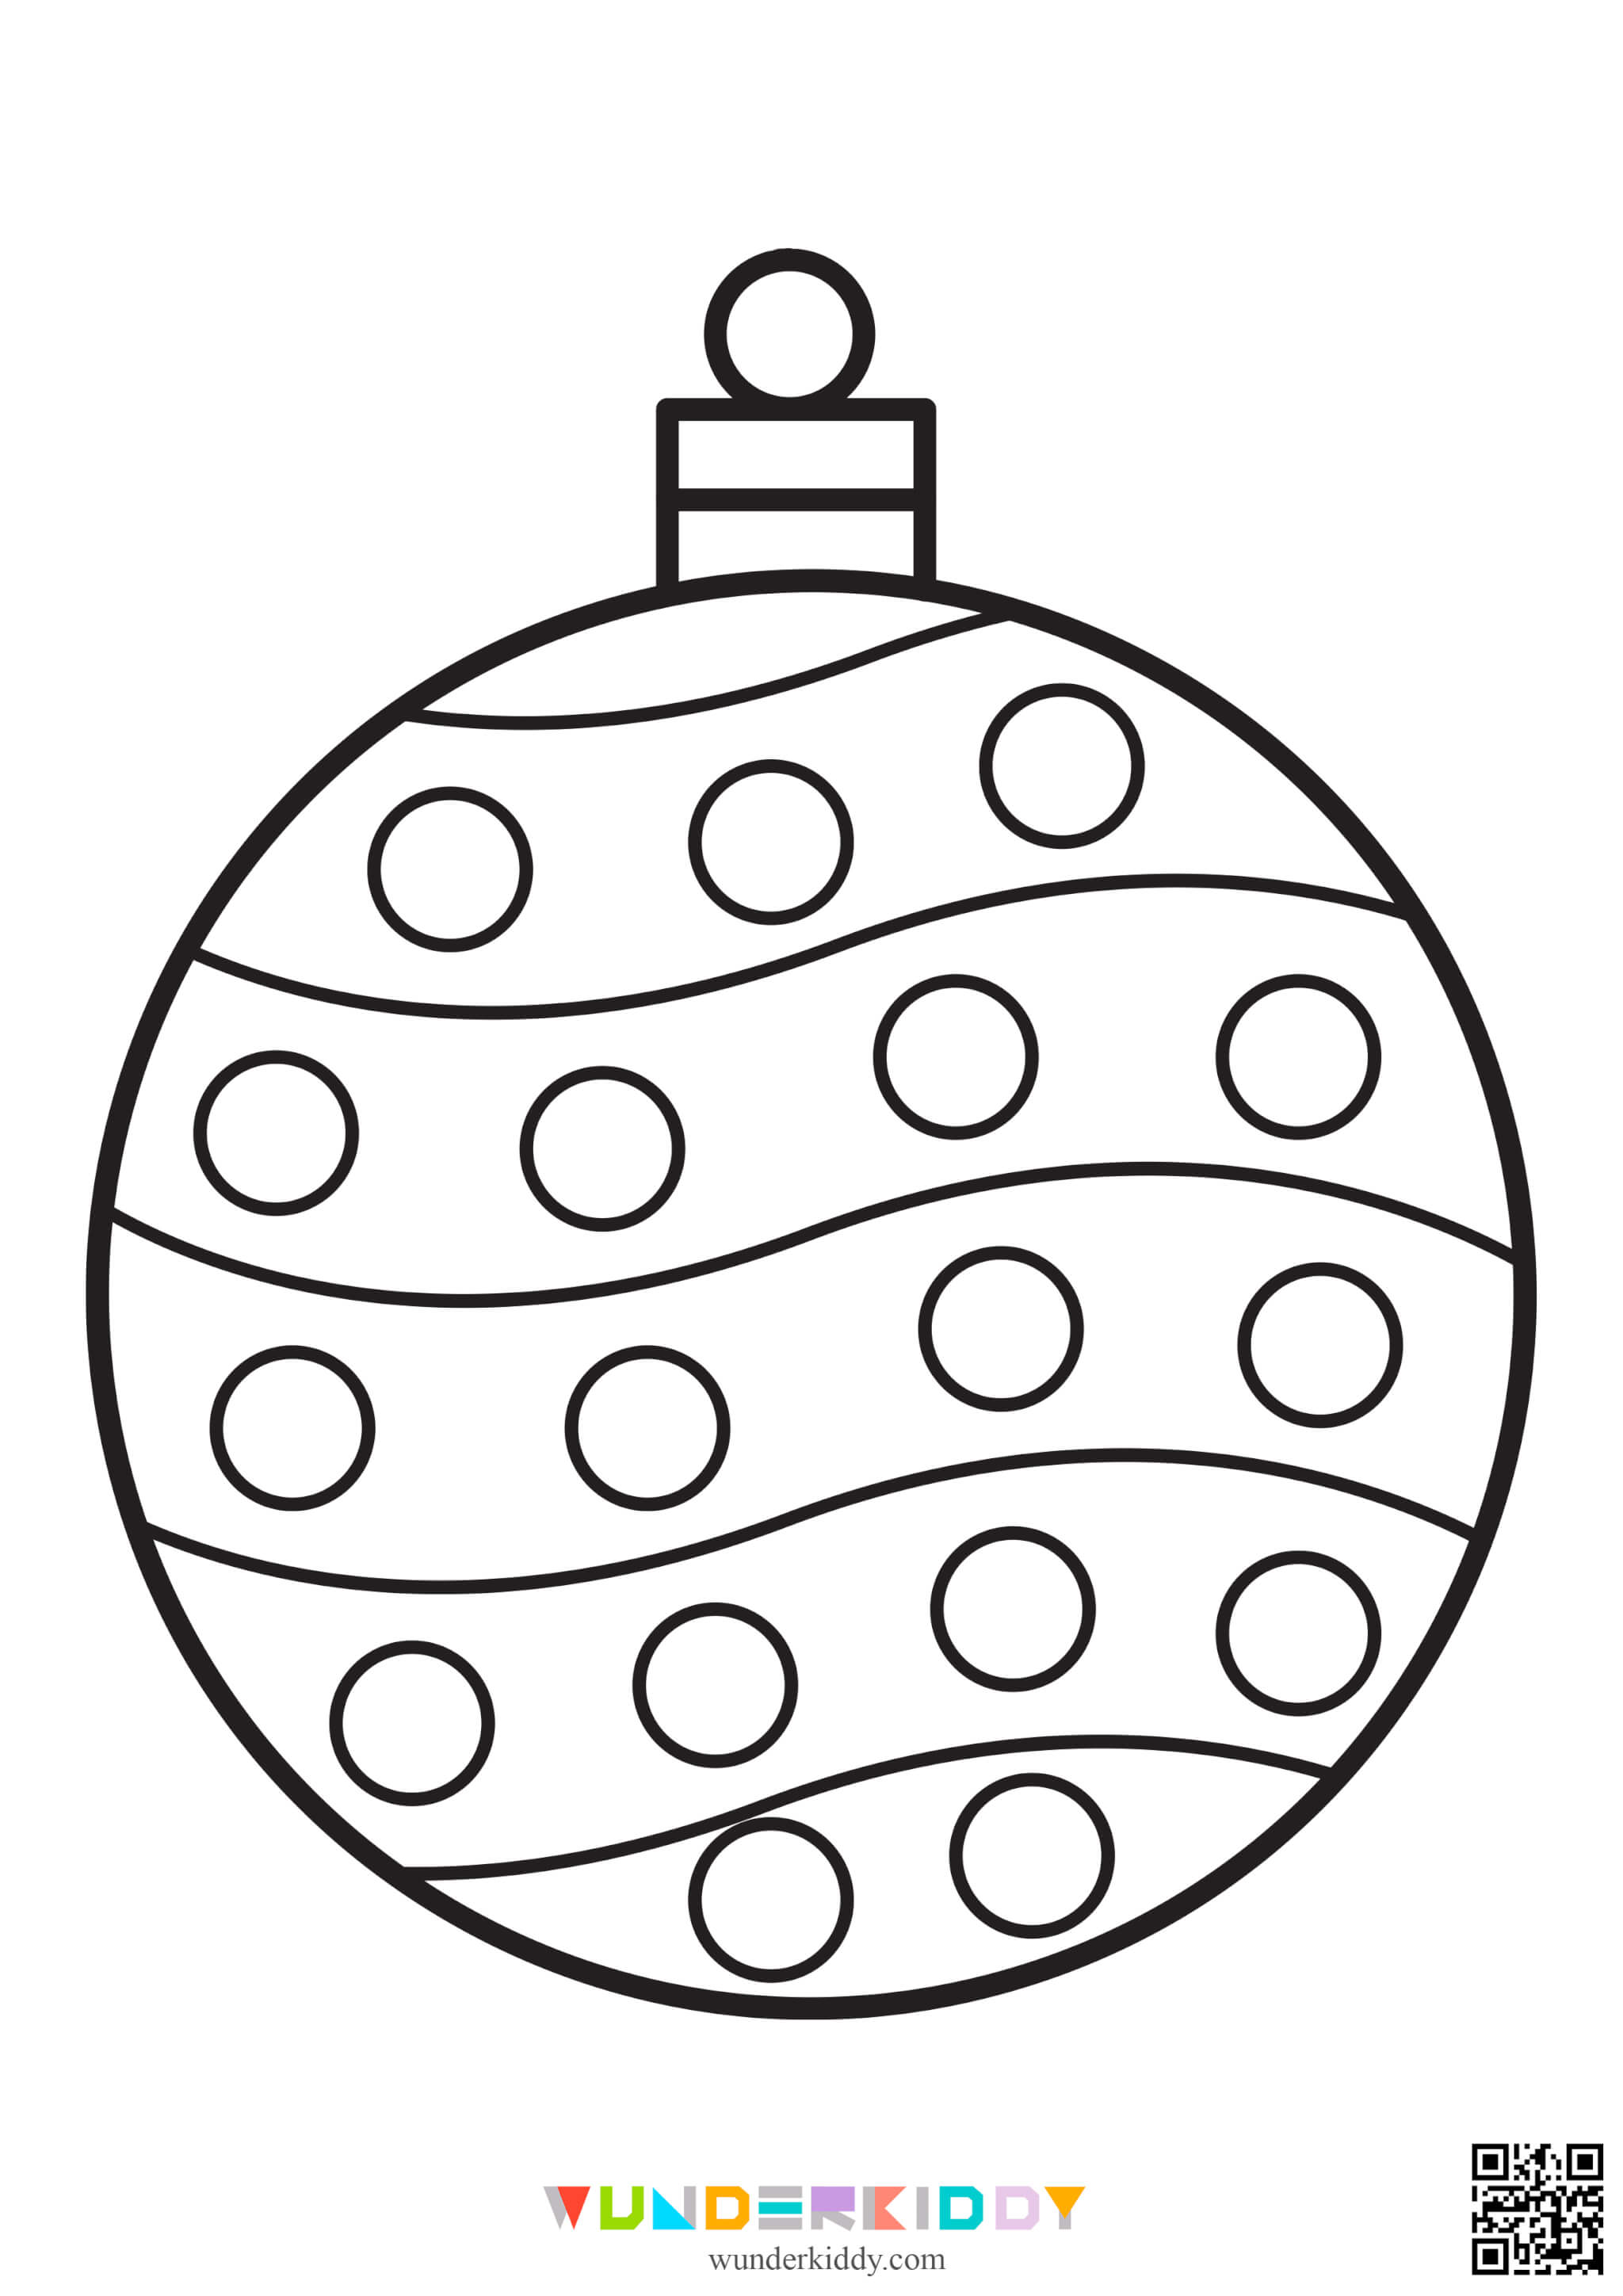 Christmas Ornament Coloring Pages - Image 9